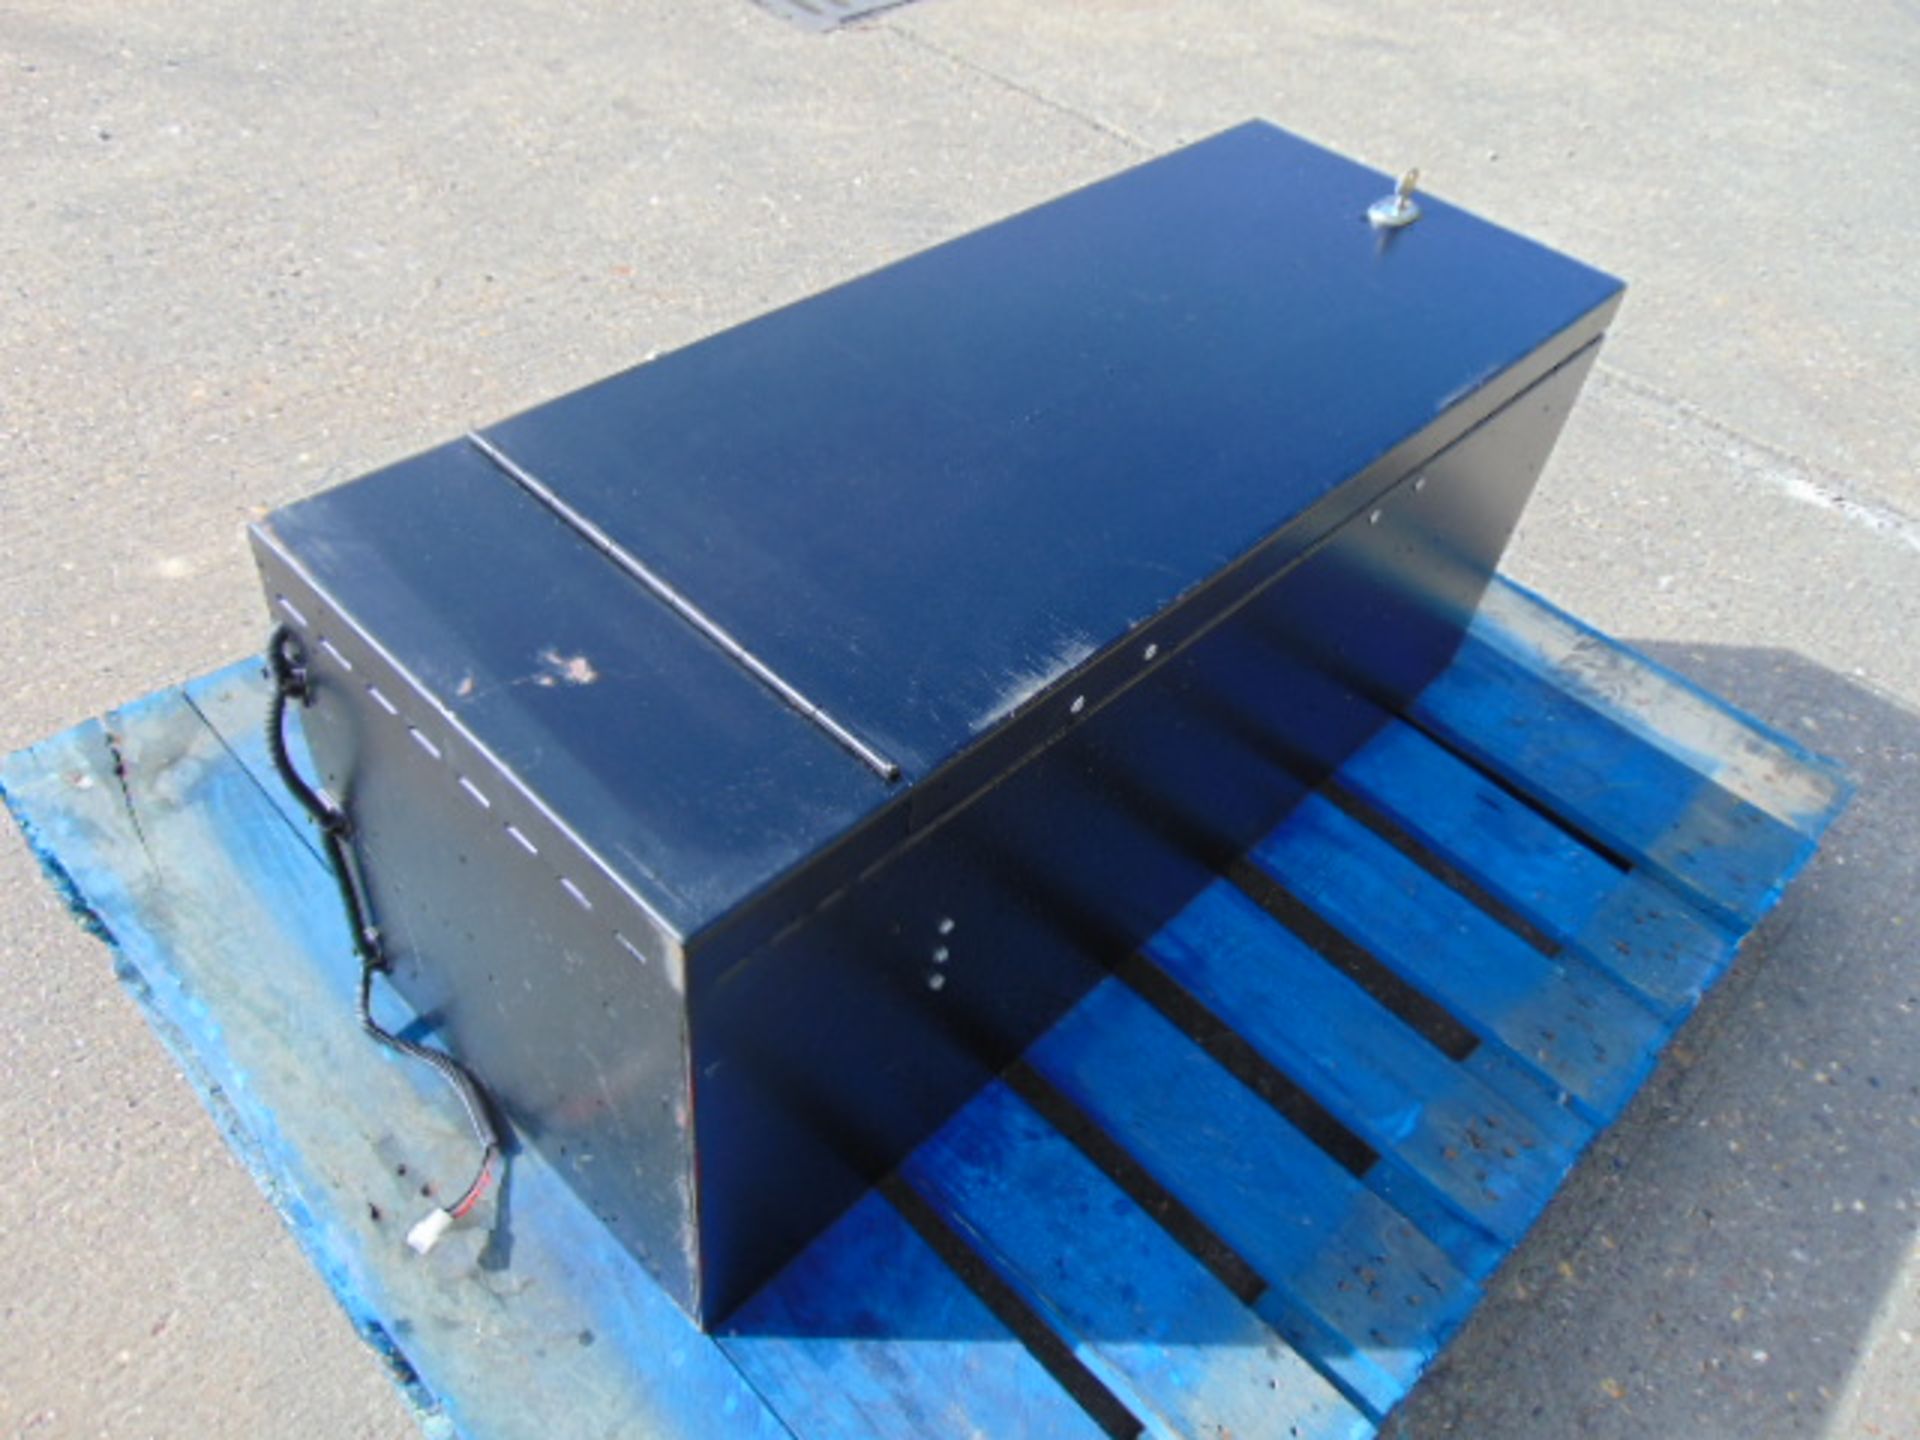 Secure Lockable Vehicle Storage Box 90 x 40 x 35 cms as shown - Image 3 of 7